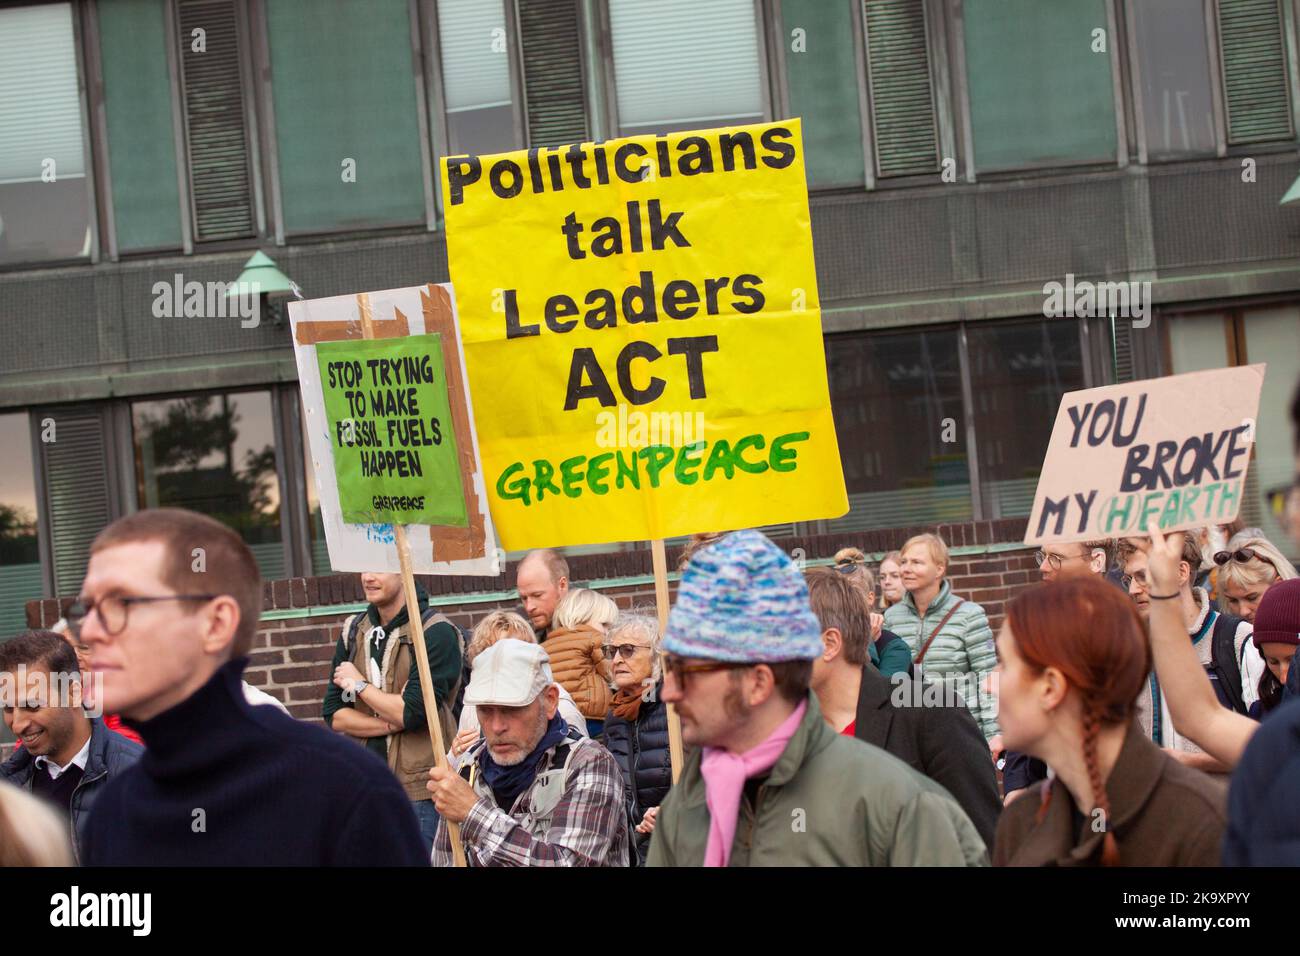 A sign reads Politicians talk Leaders ACT. The people s Climate March to support action on global climate change. Copenhagen, Denmark - October 30, 20 Stock Photo